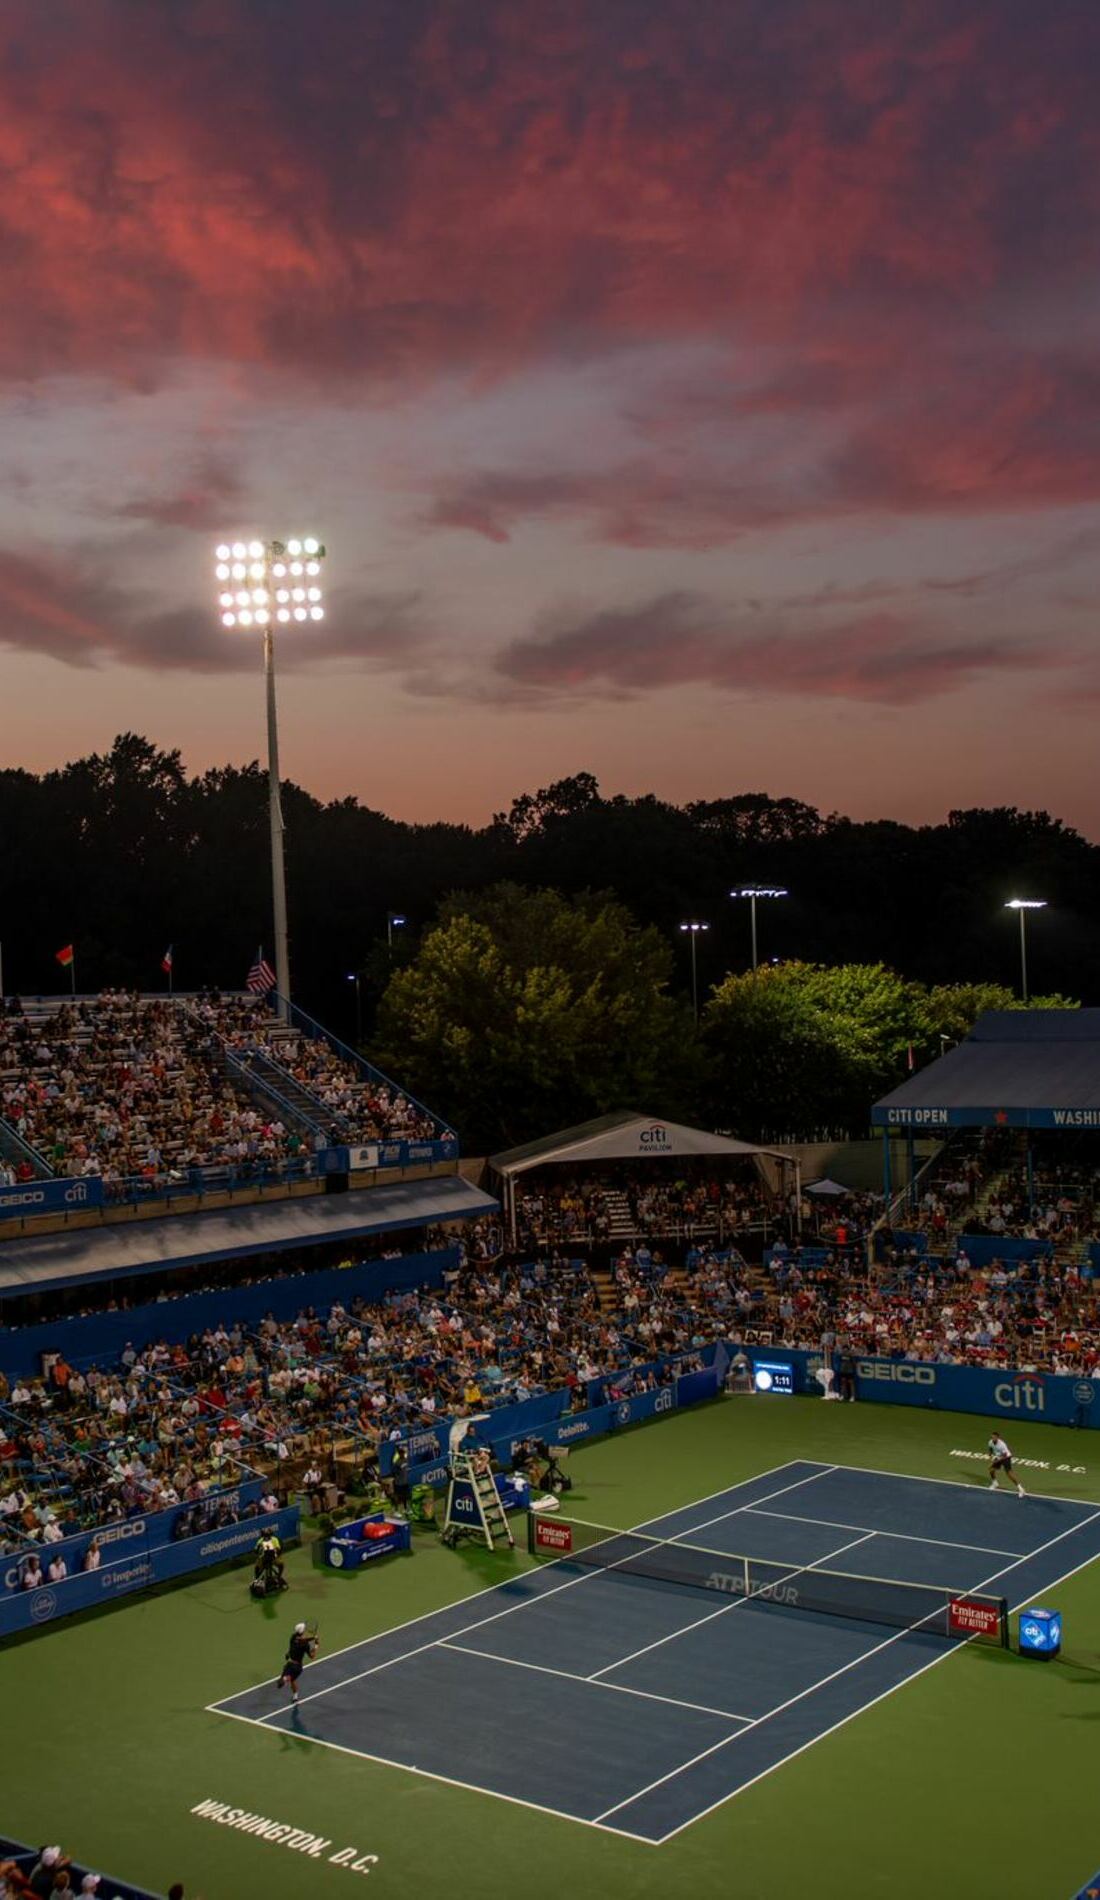 A Citi Open Tennis Lock Your Seat live event